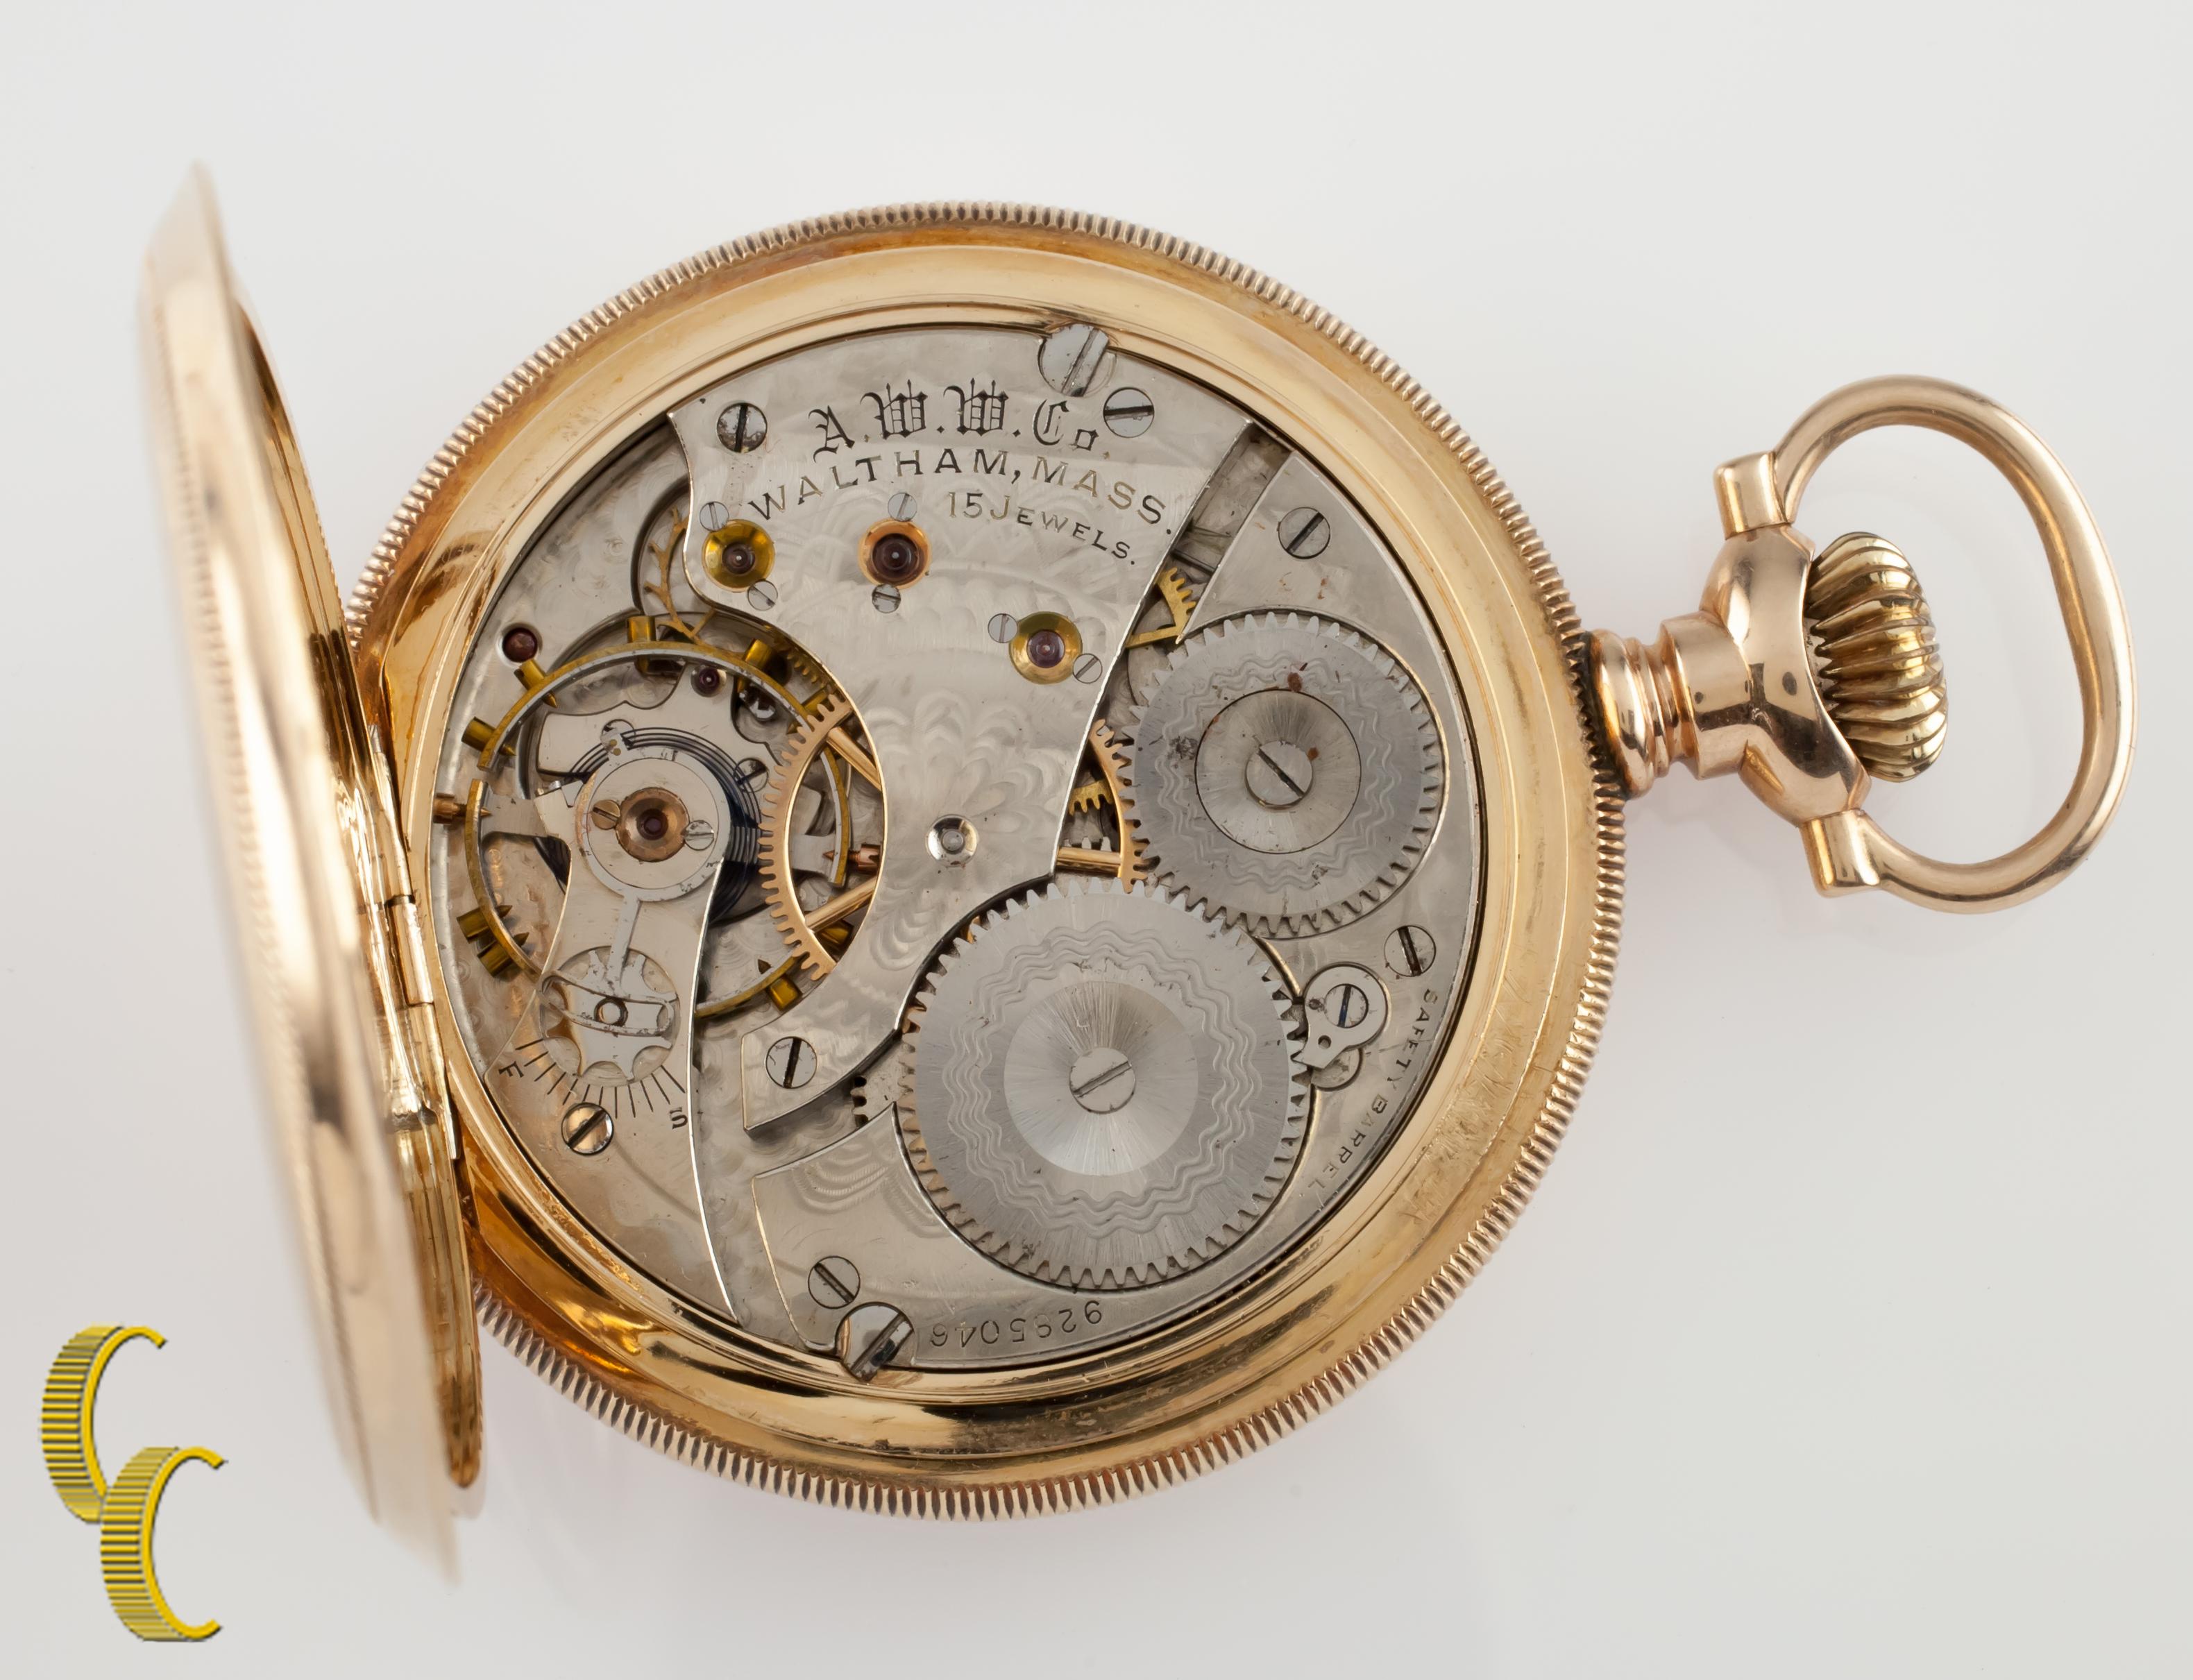 Beautiful Antique Waltham Pocket Watch w/ White Dial Including Cobalt Blue Hands & Dedicated Second Dial
14k Yellow Gold Case w/ Intricate Guilloche Design on Case
Black Arabic Numerals
Case Serial #4583861
15-Jewel Waltham Movement Serial